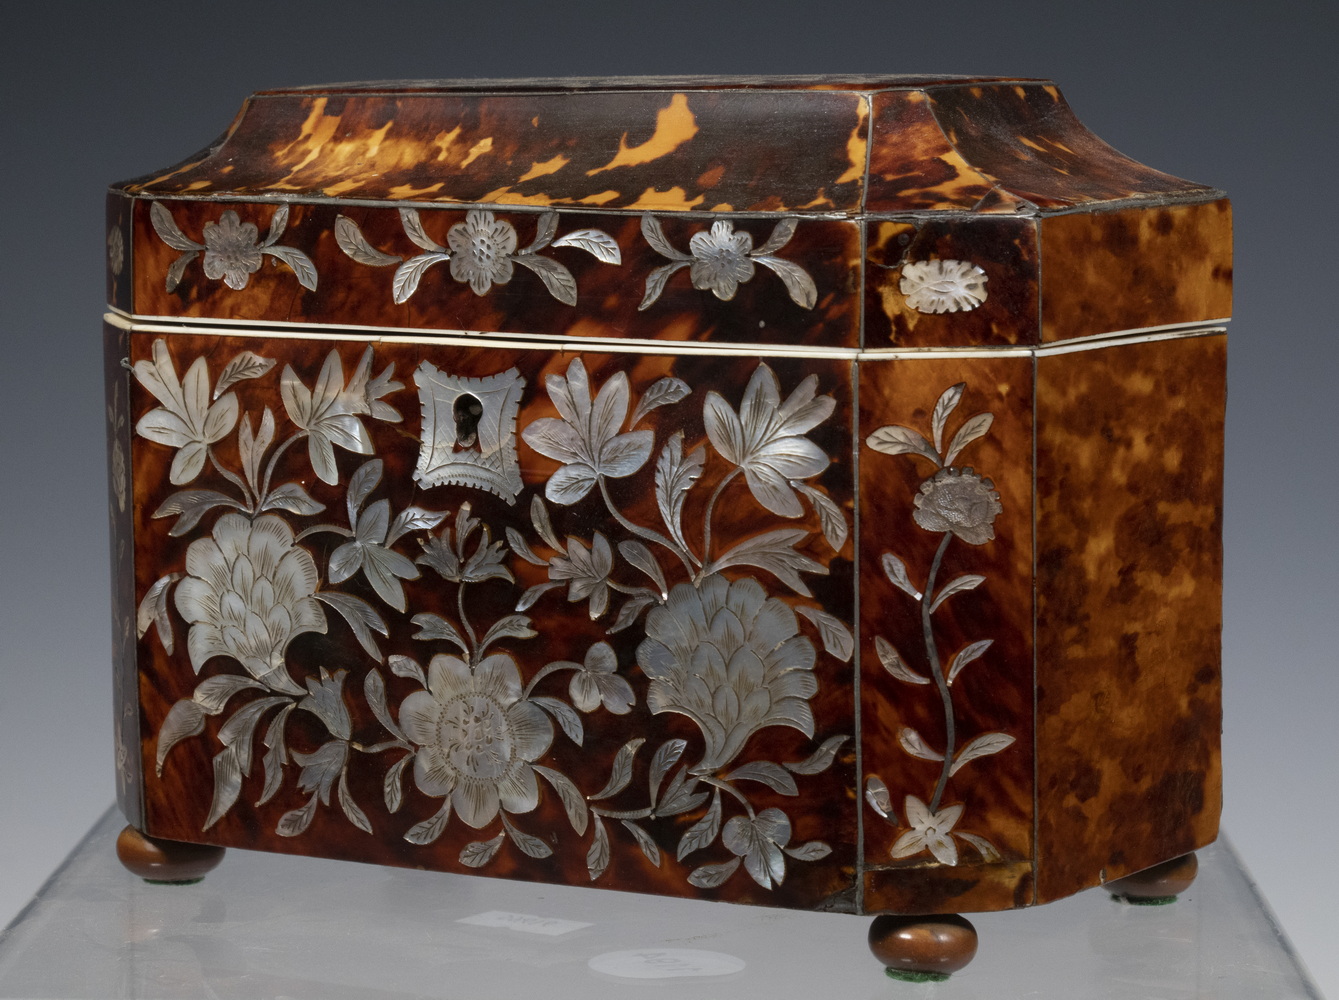 MOTHER OF PEARL INLAID TORTOISESHELL 3022e4